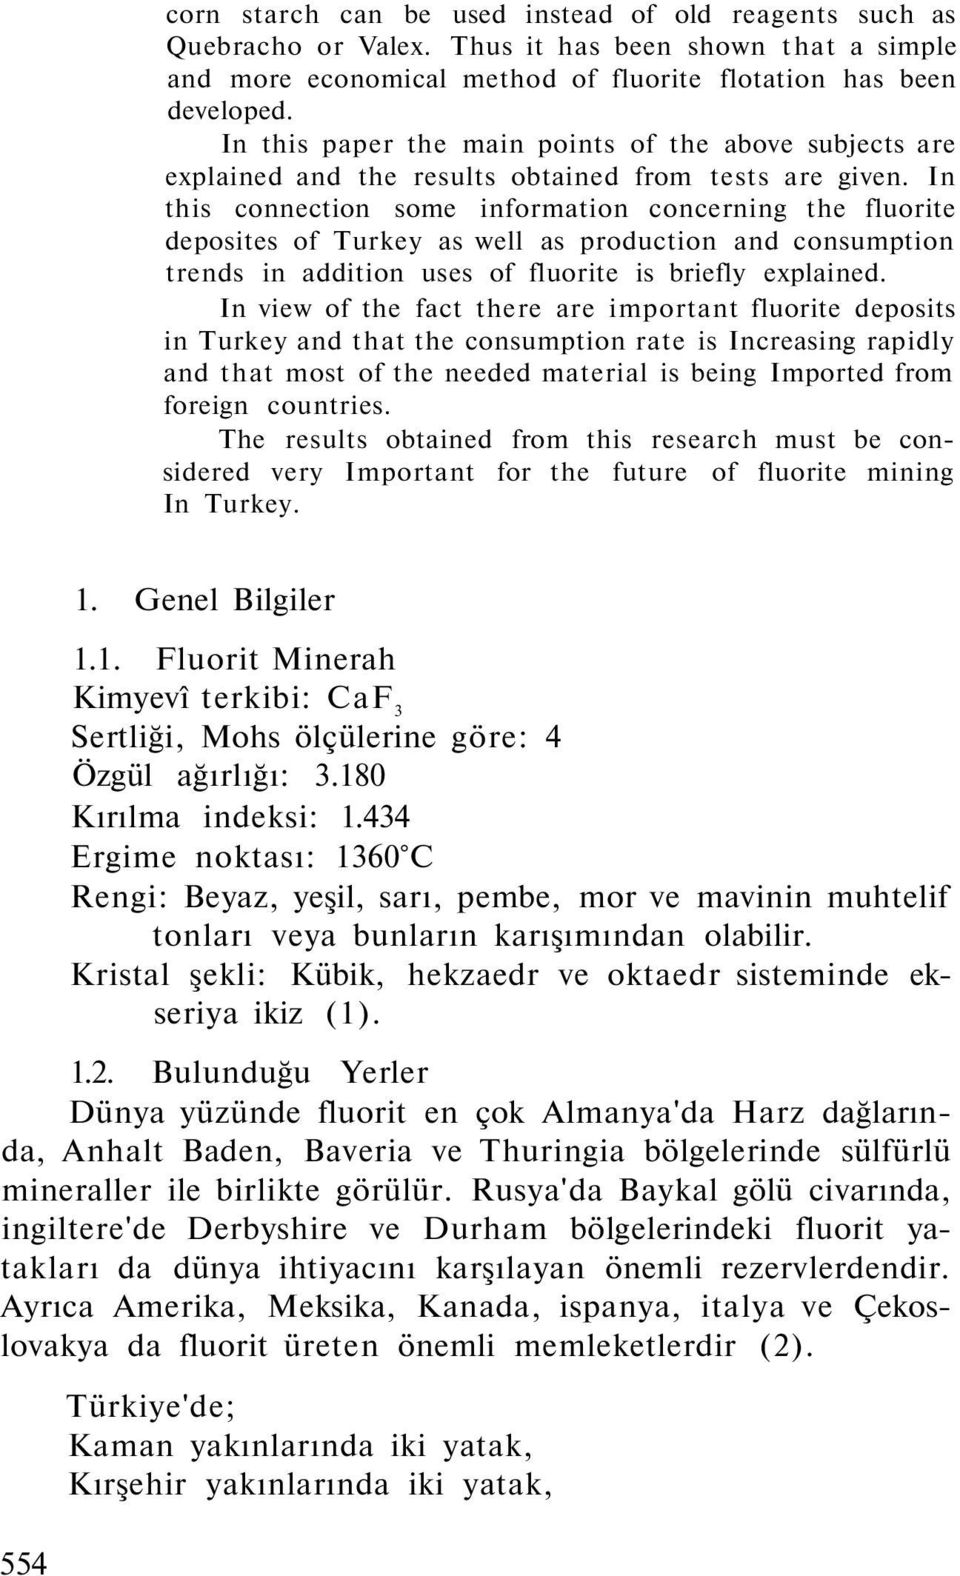 In this connection some information concerning the fluorite deposites of Turkey as well as production and consumption trends in addition uses of fluorite is briefly explained.